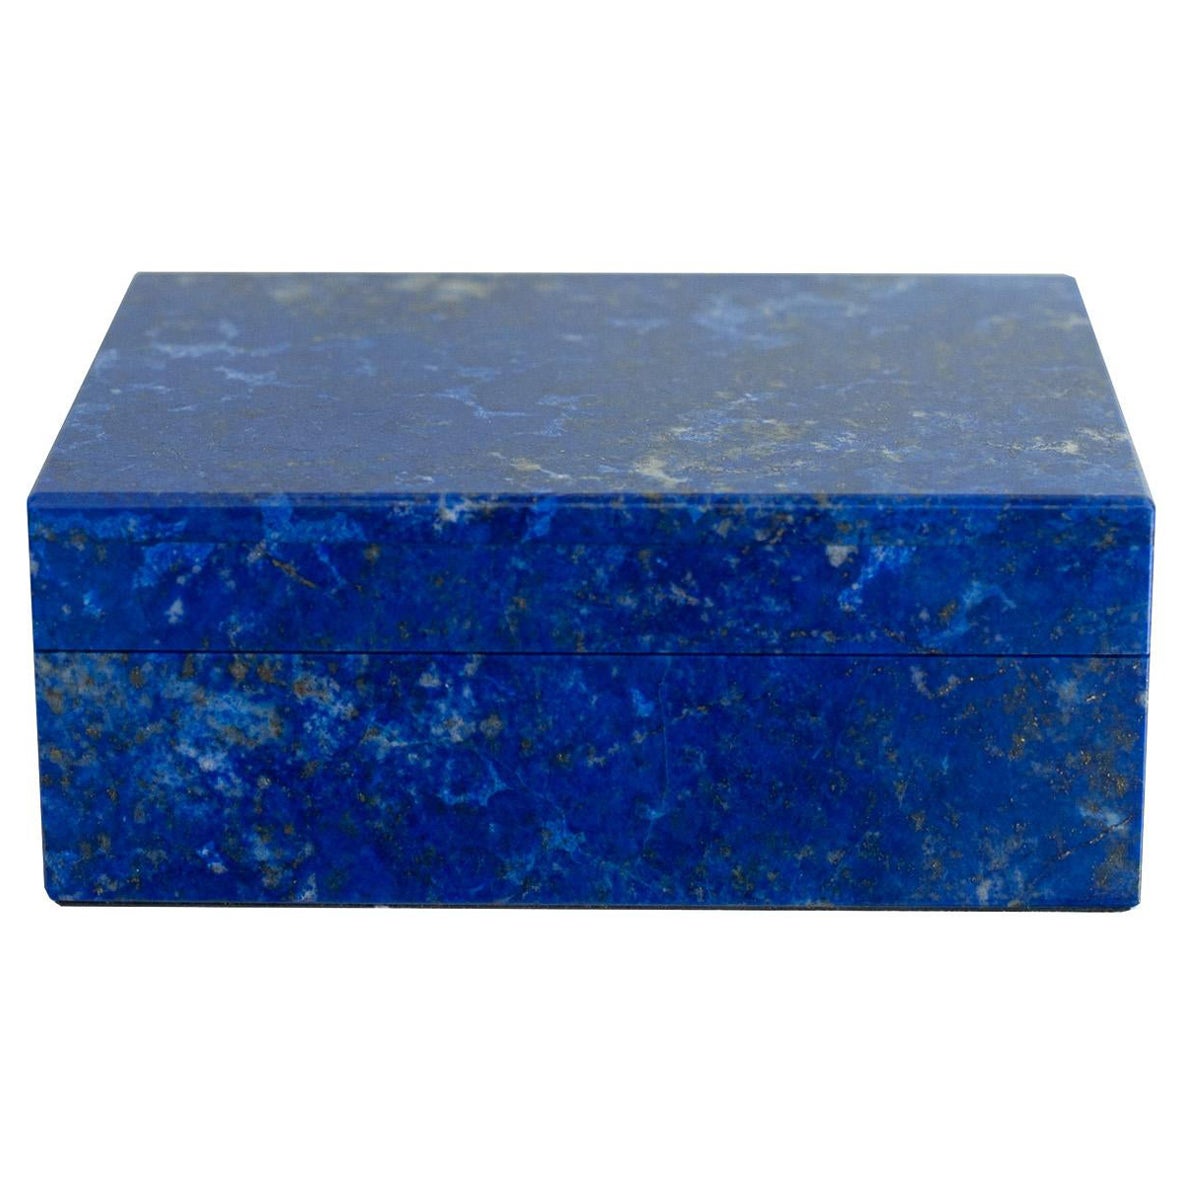 Contemporary Italian Small Blue Lapis Box with Hinged Lid